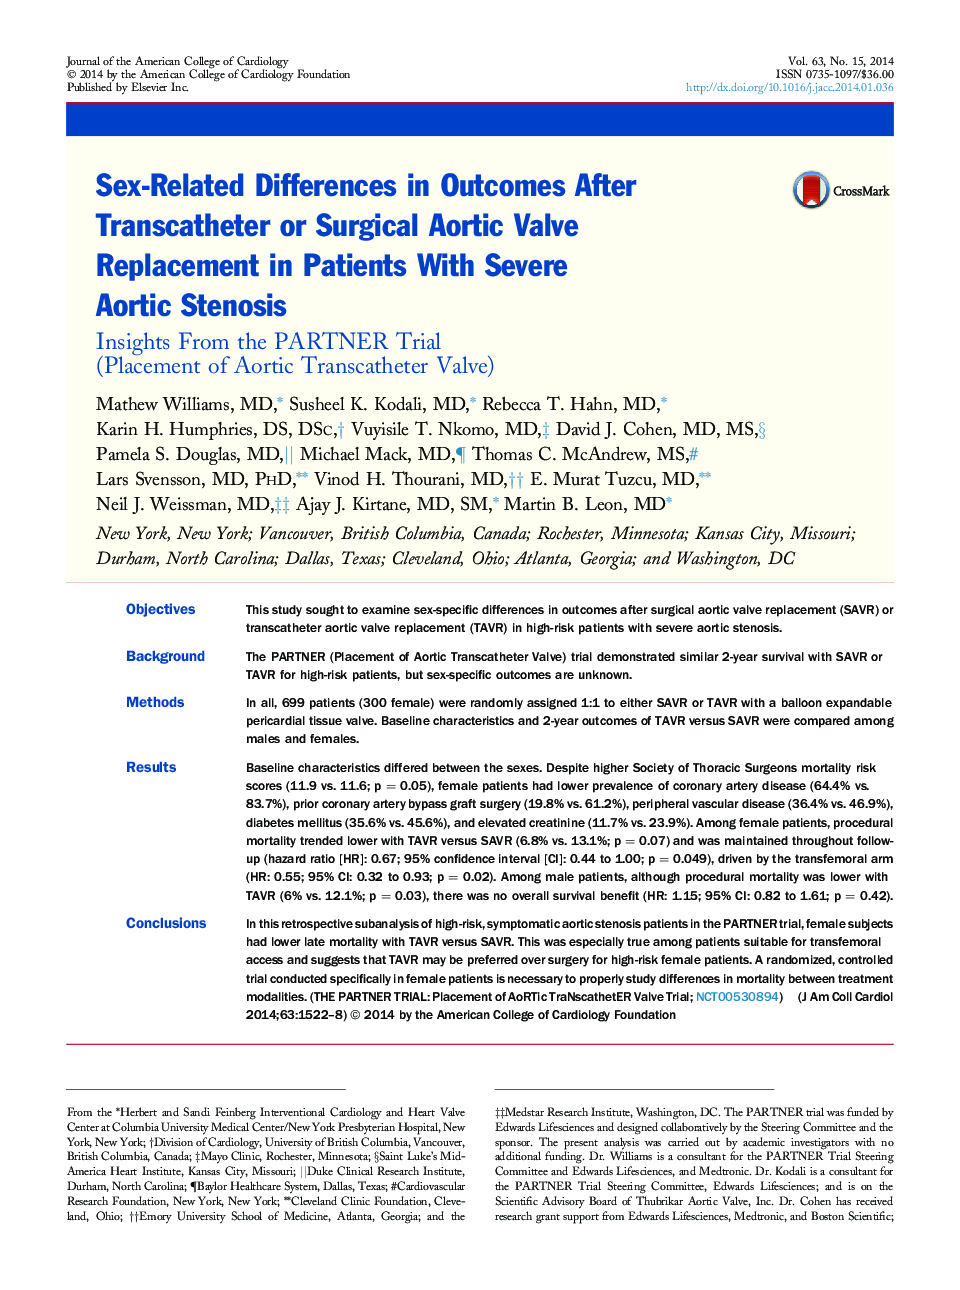 Sex-Related Differences in Outcomes After Transcatheter or Surgical Aortic Valve Replacement in Patients With Severe Aortic Stenosis : Insights From the PARTNER Trial (Placement of Aortic Transcatheter Valve)